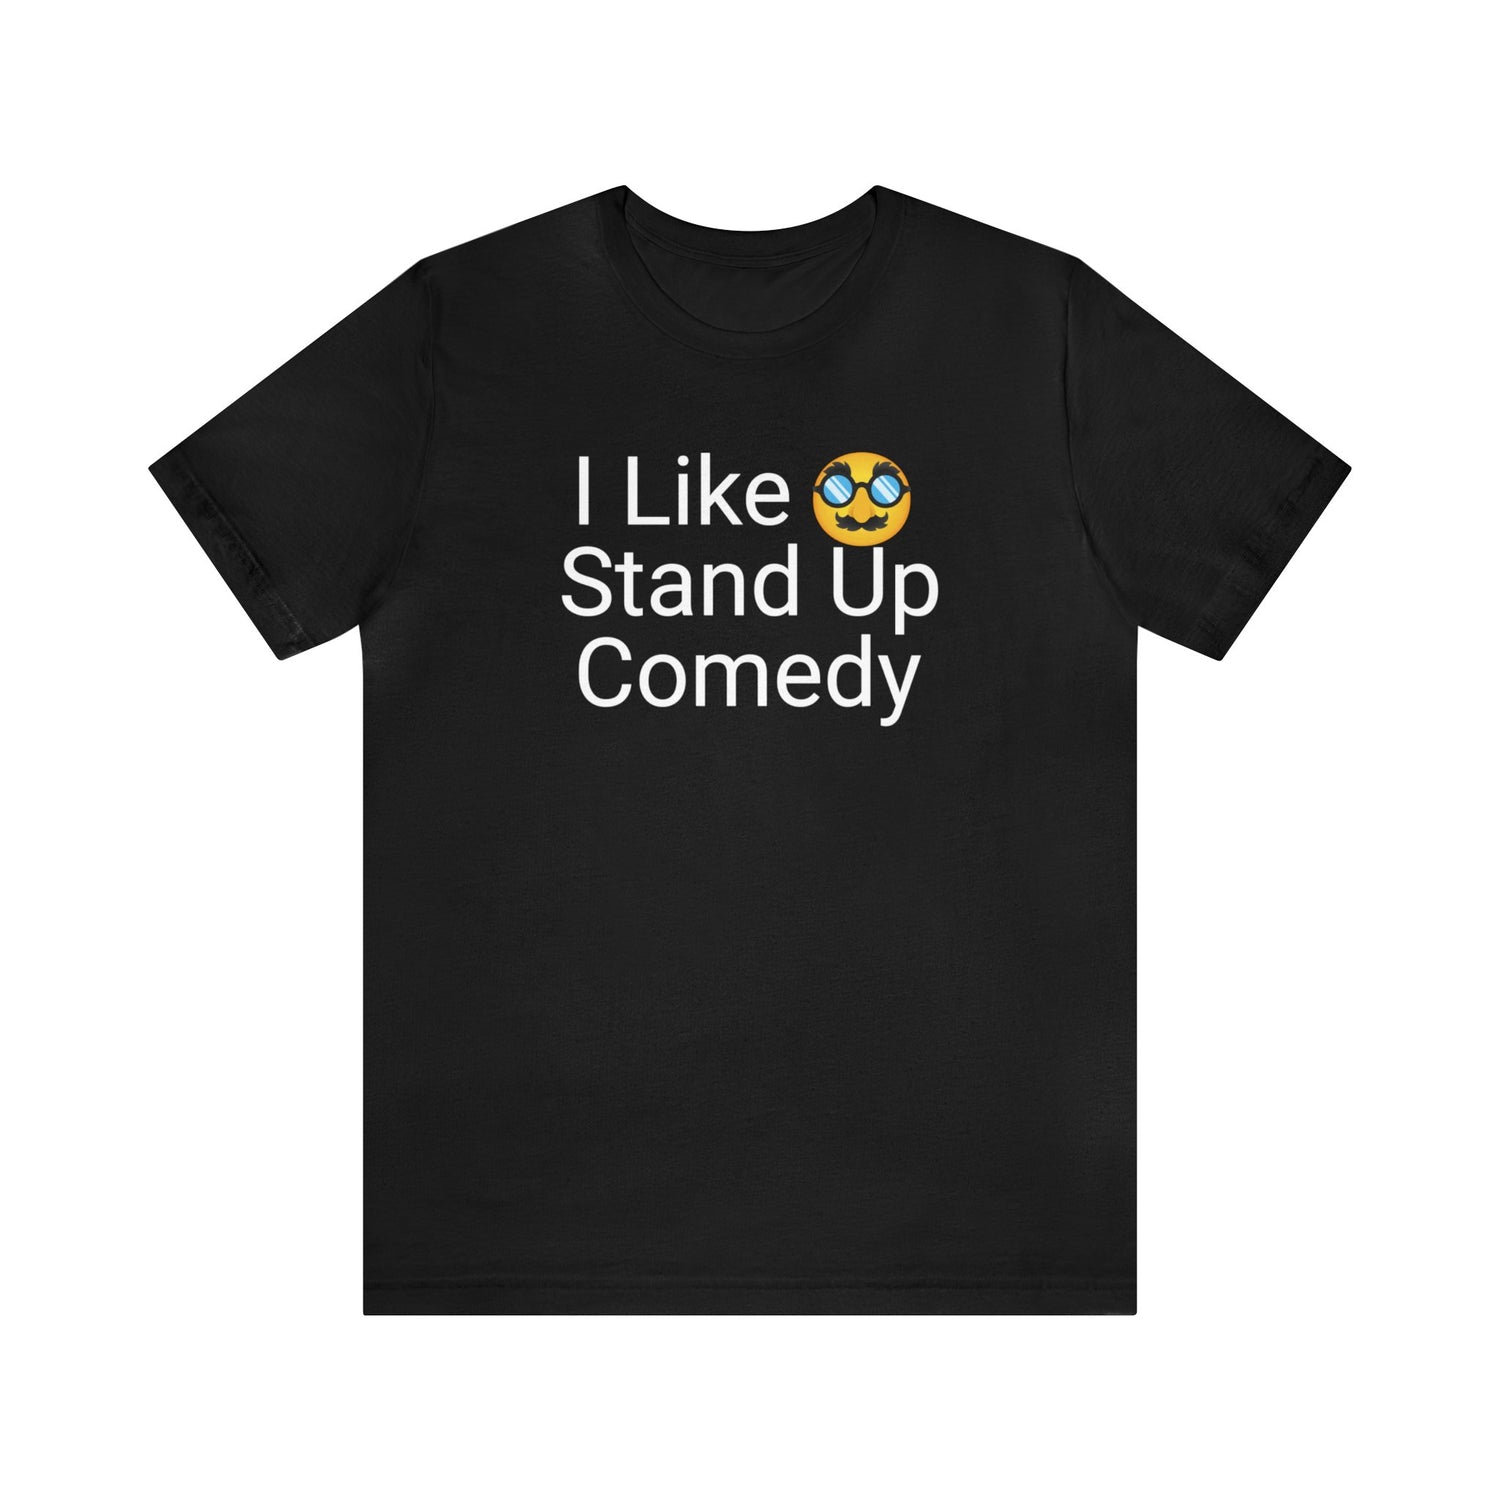 Comedians Comedy Enthusiasts Comedy Lover Comedy Lover Apparel Comedy Show Comedy Specials Comfortable Connection Conversation Starter Cotton Crew neck Customer Satisfaction Entertainment Fun Gift Funny Jokes Humor Laughter Live Performances Quality Shared Experience Stand-Up Comedy Stylish T-shirts Unisex Wit